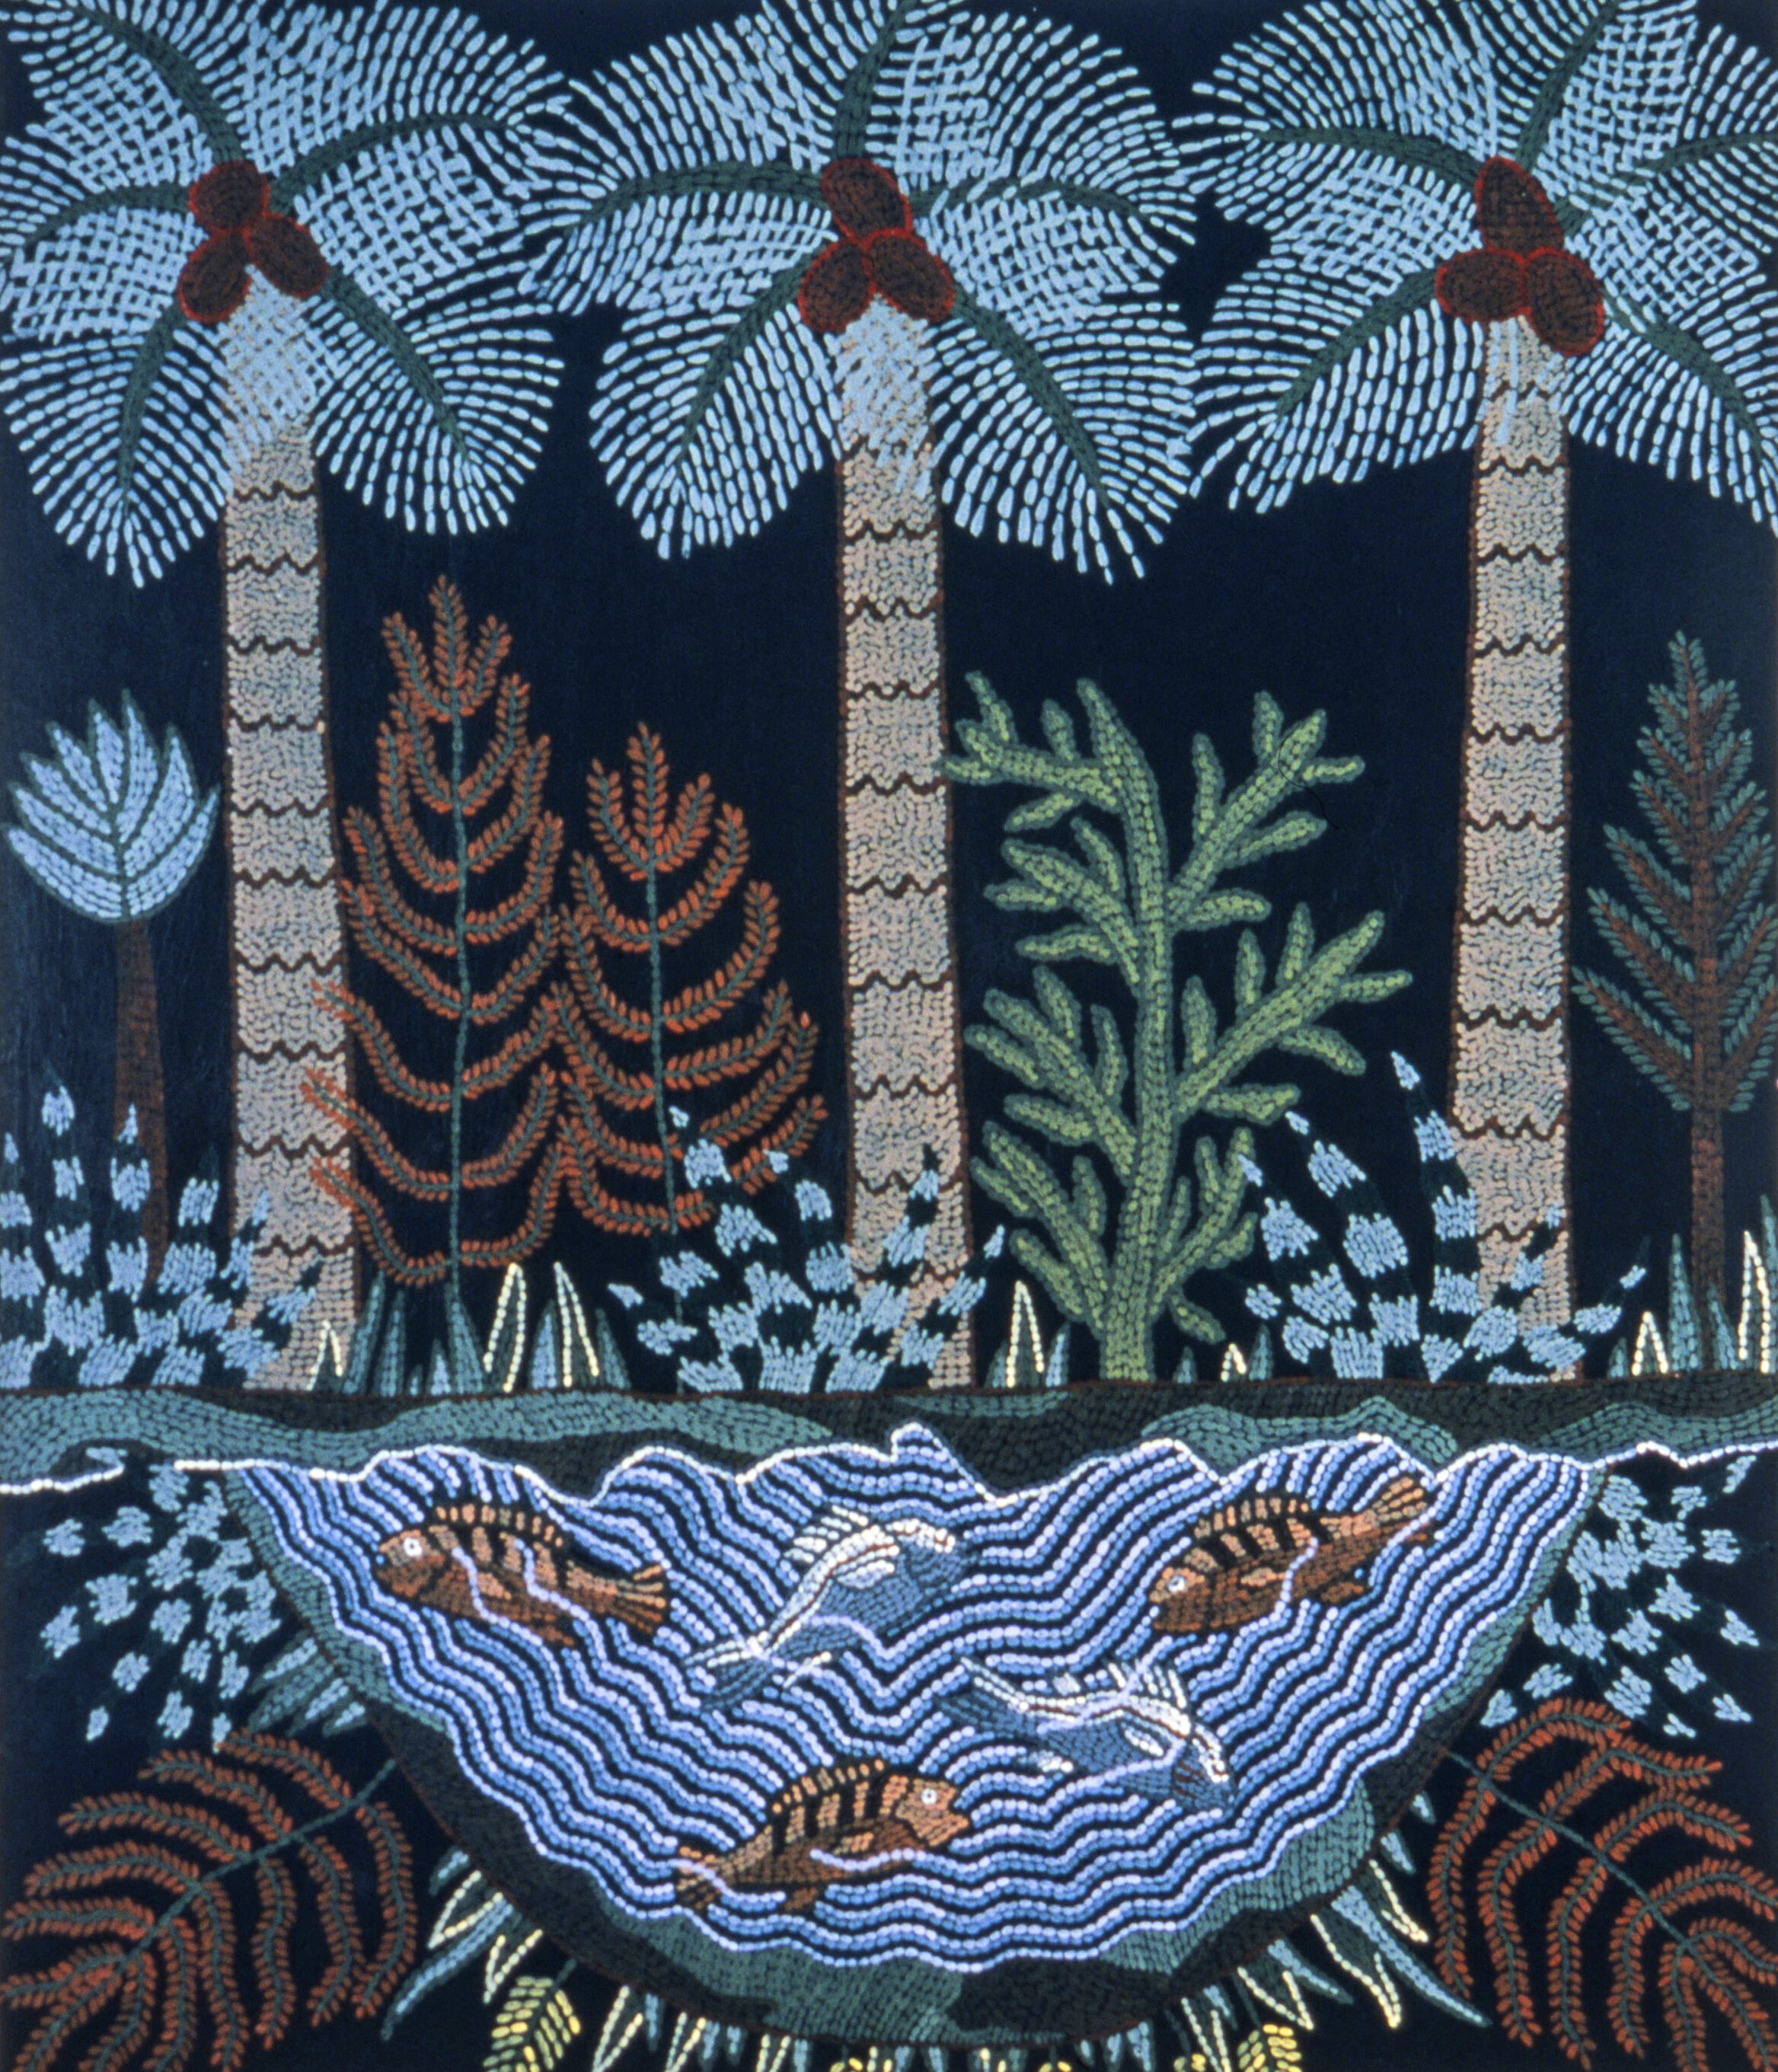   Tropical Fish Pond , 1973, acrylic on on paper, 22 x 26 inches. Solo show at Whitney Museum, collection of Marcia Tucker. 